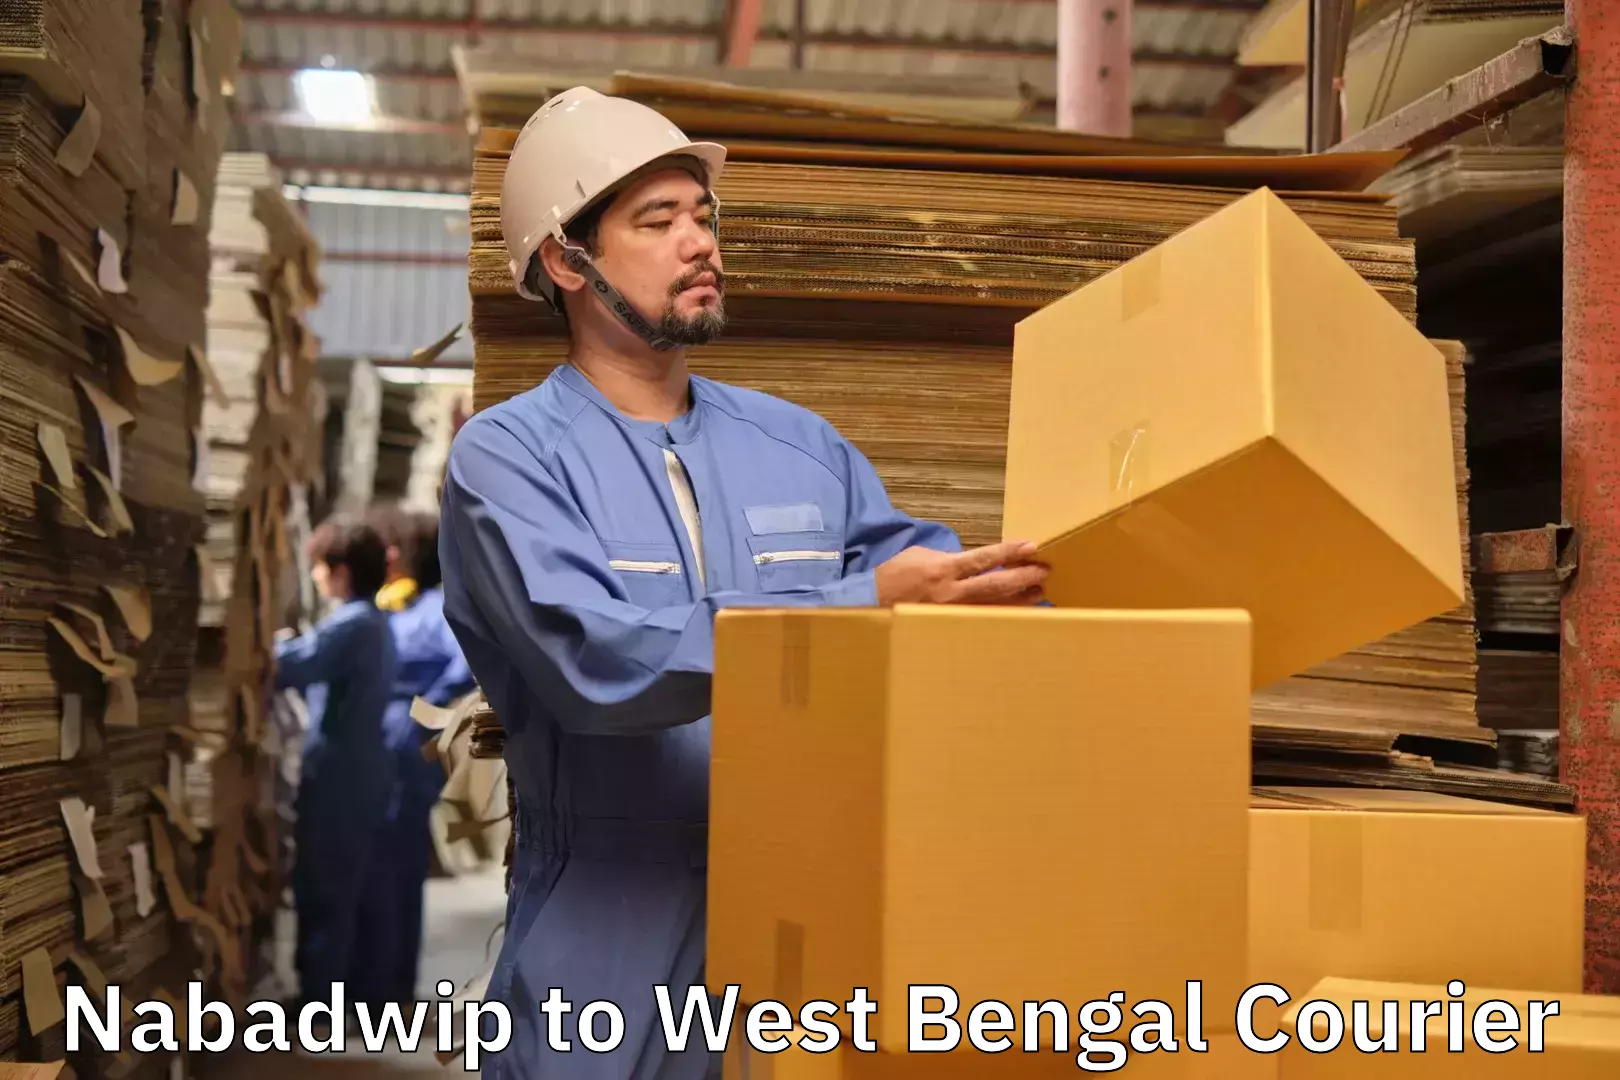 Luggage delivery network Nabadwip to West Bengal